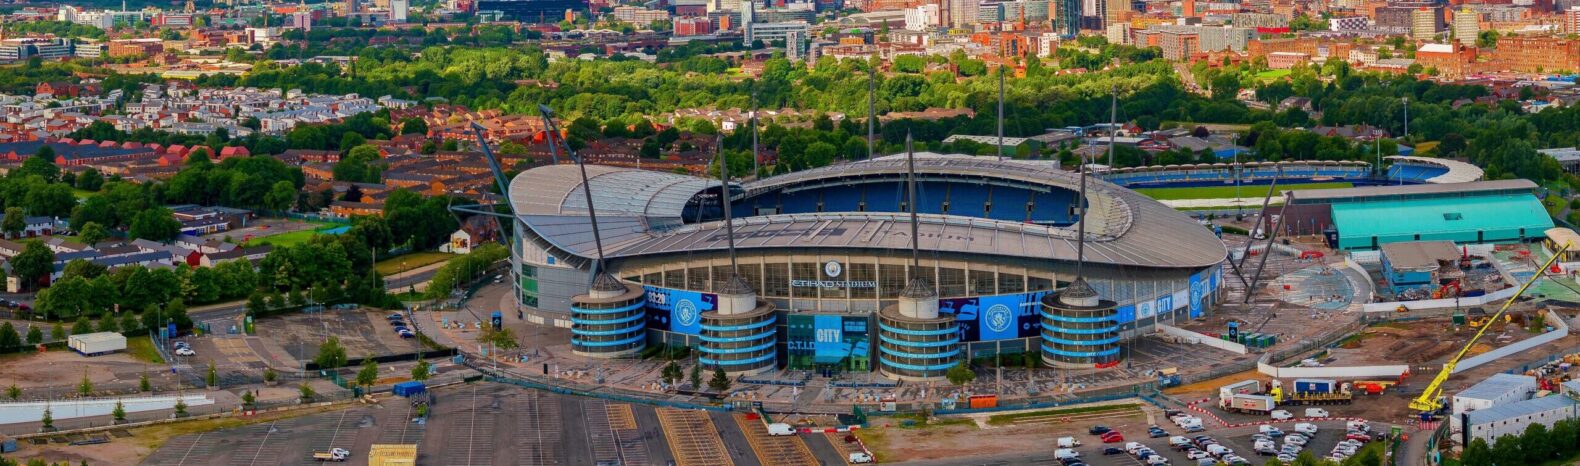 aerial shot if MCFC arena surrounded by trees and buildings